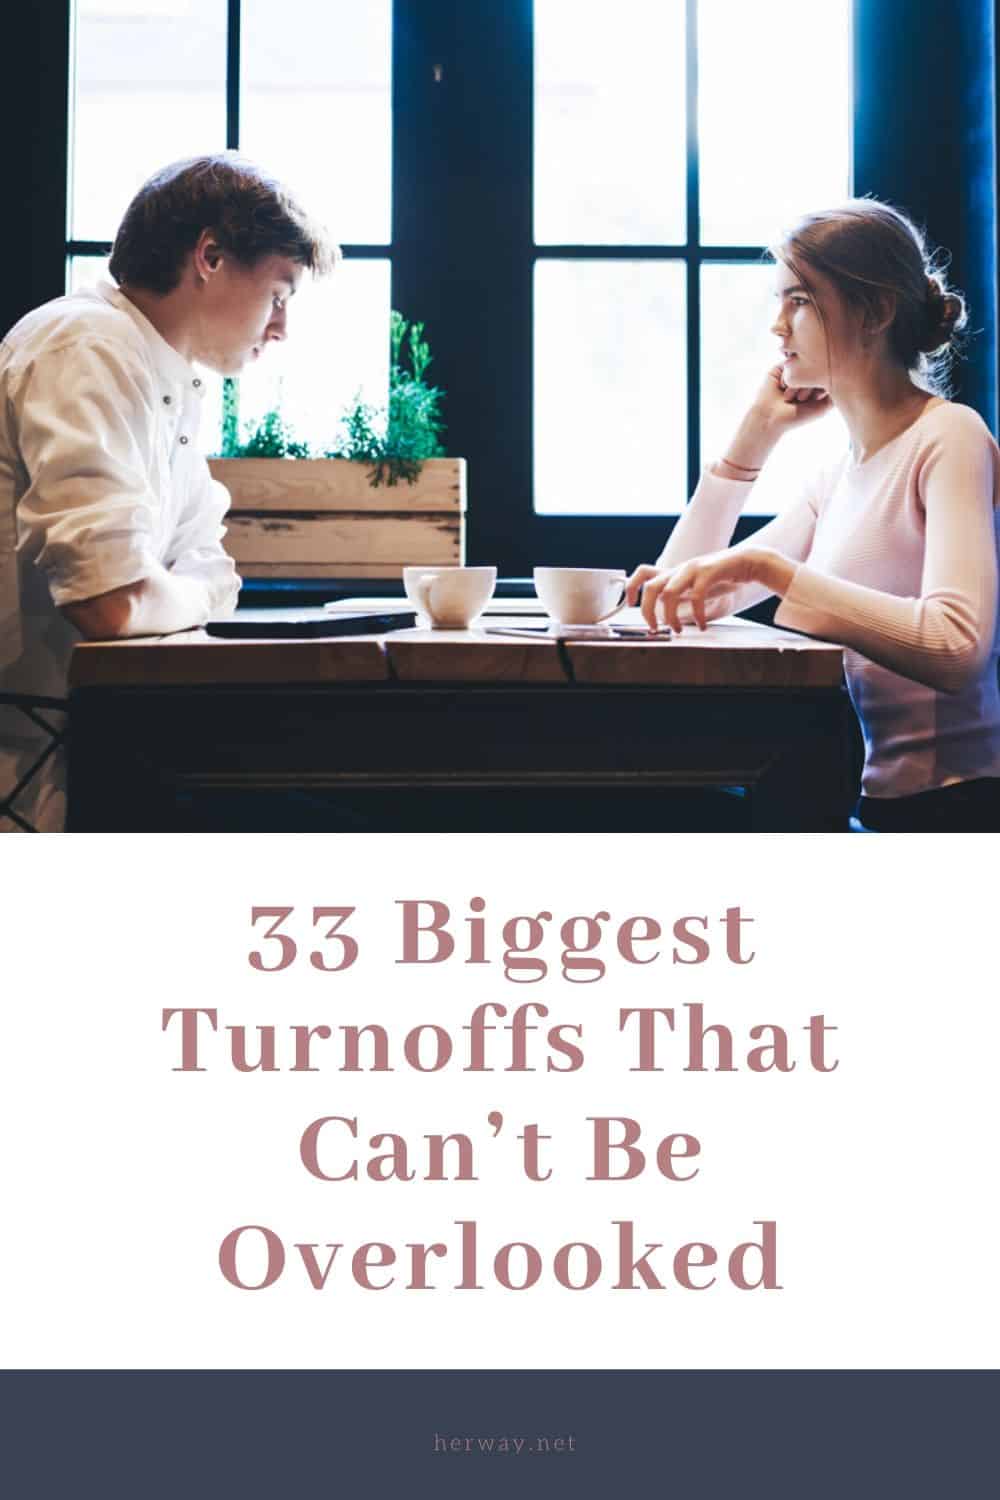 33 Biggest Turnoffs That Can’t Be Overlooked